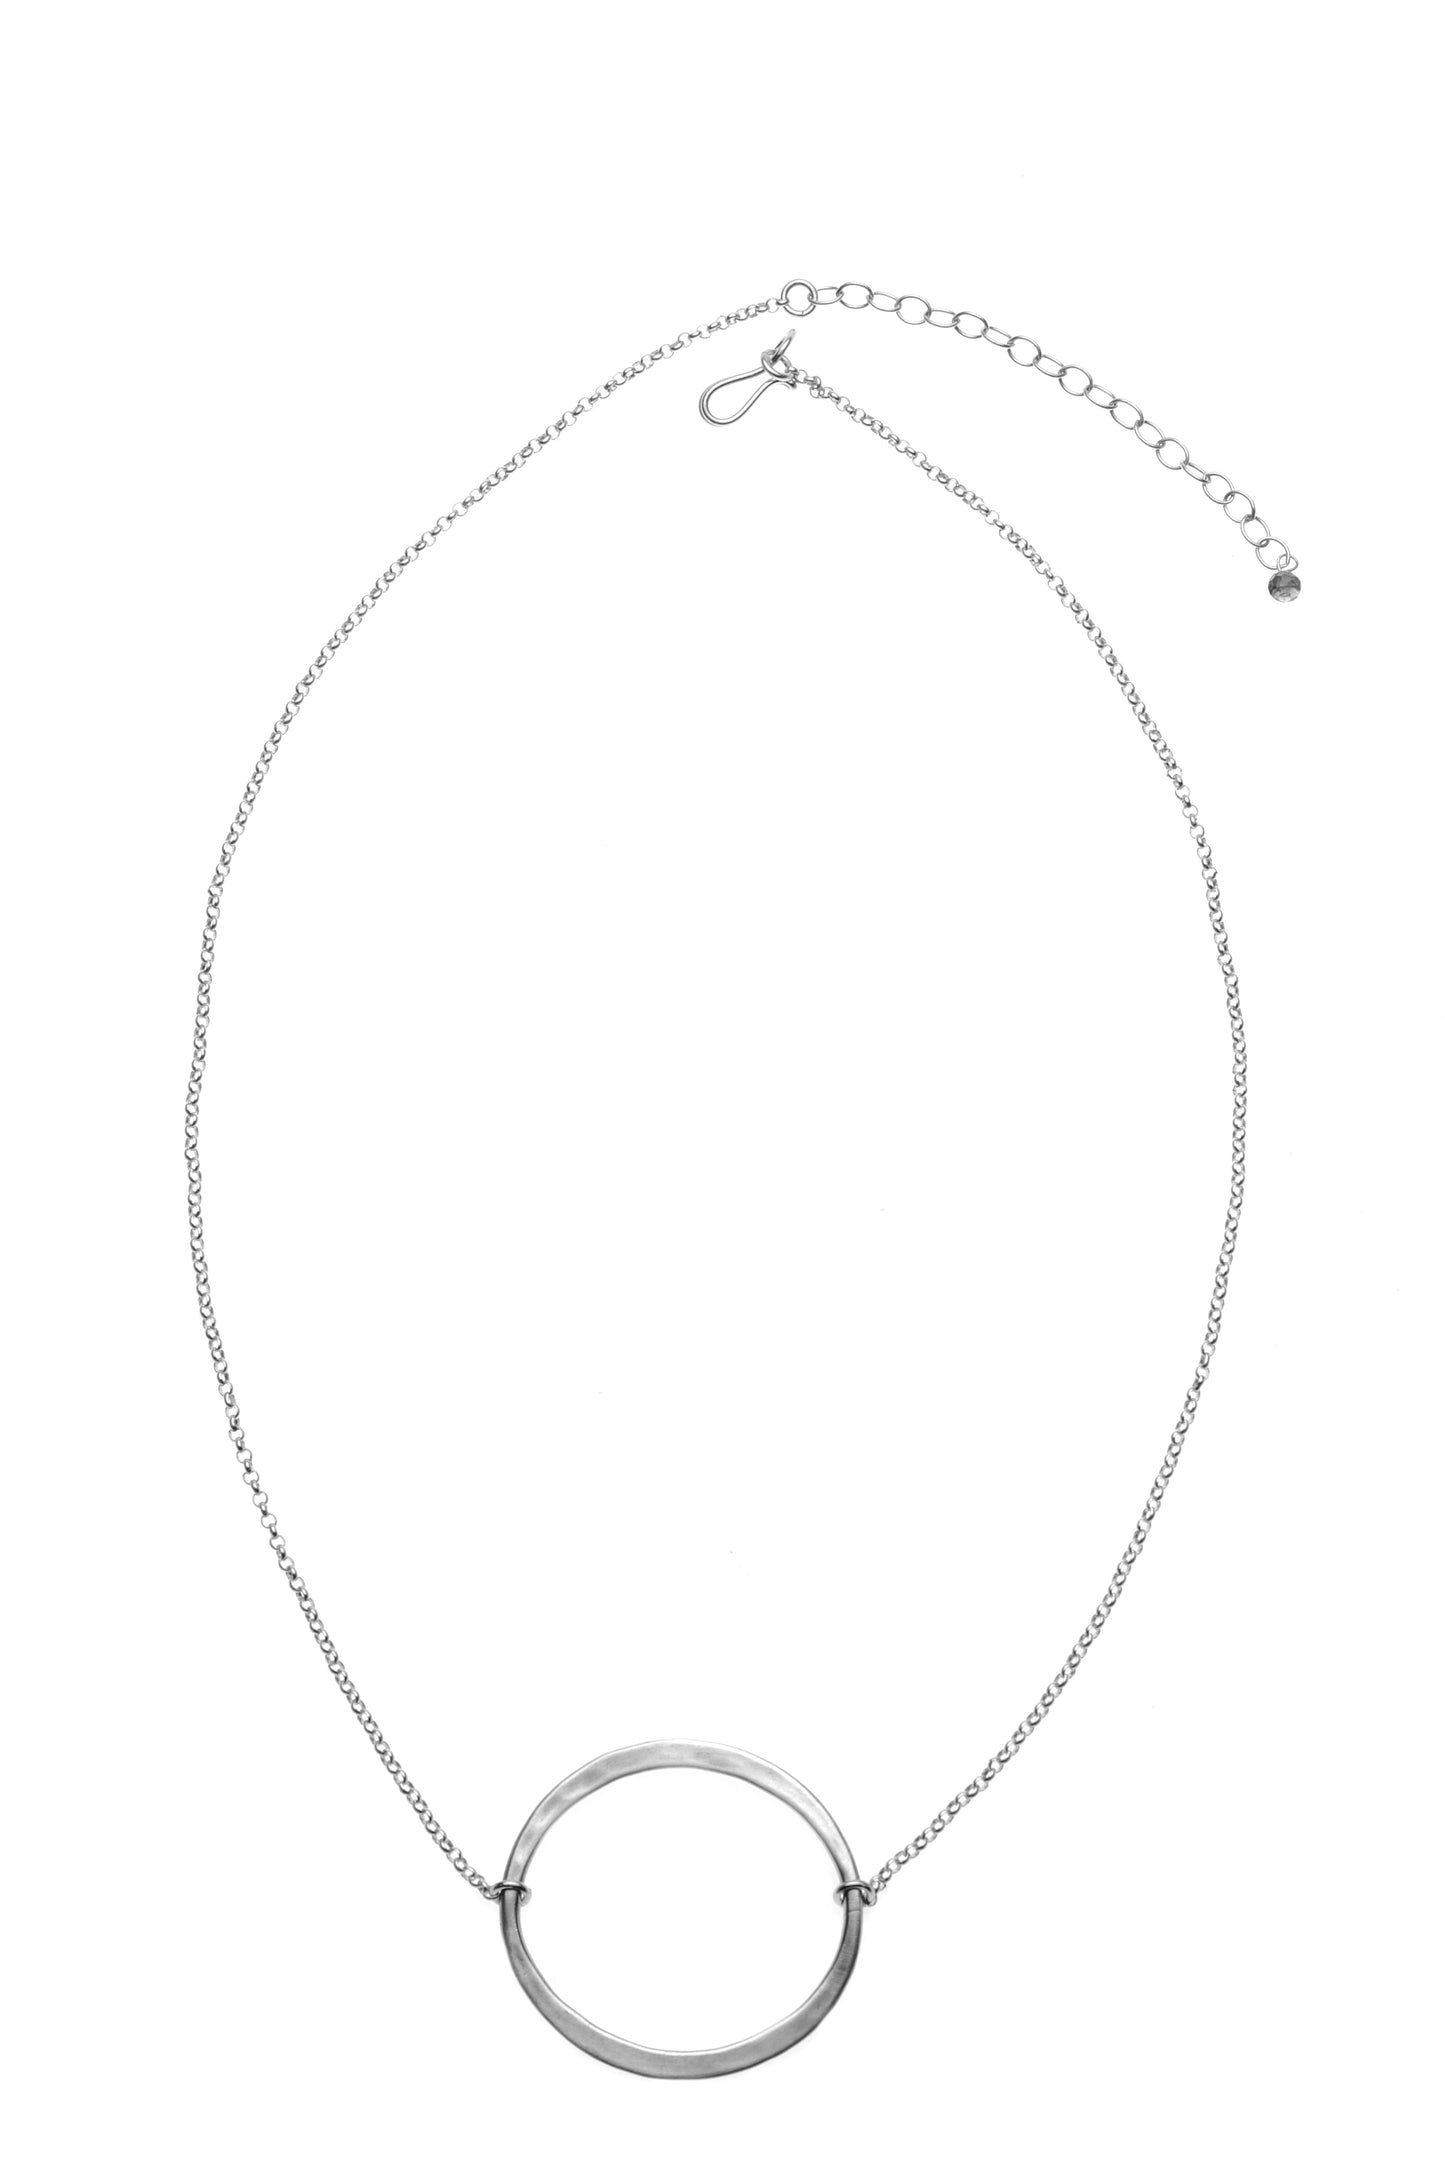 Kai Large Matte Necklace Sterling Silver Chain